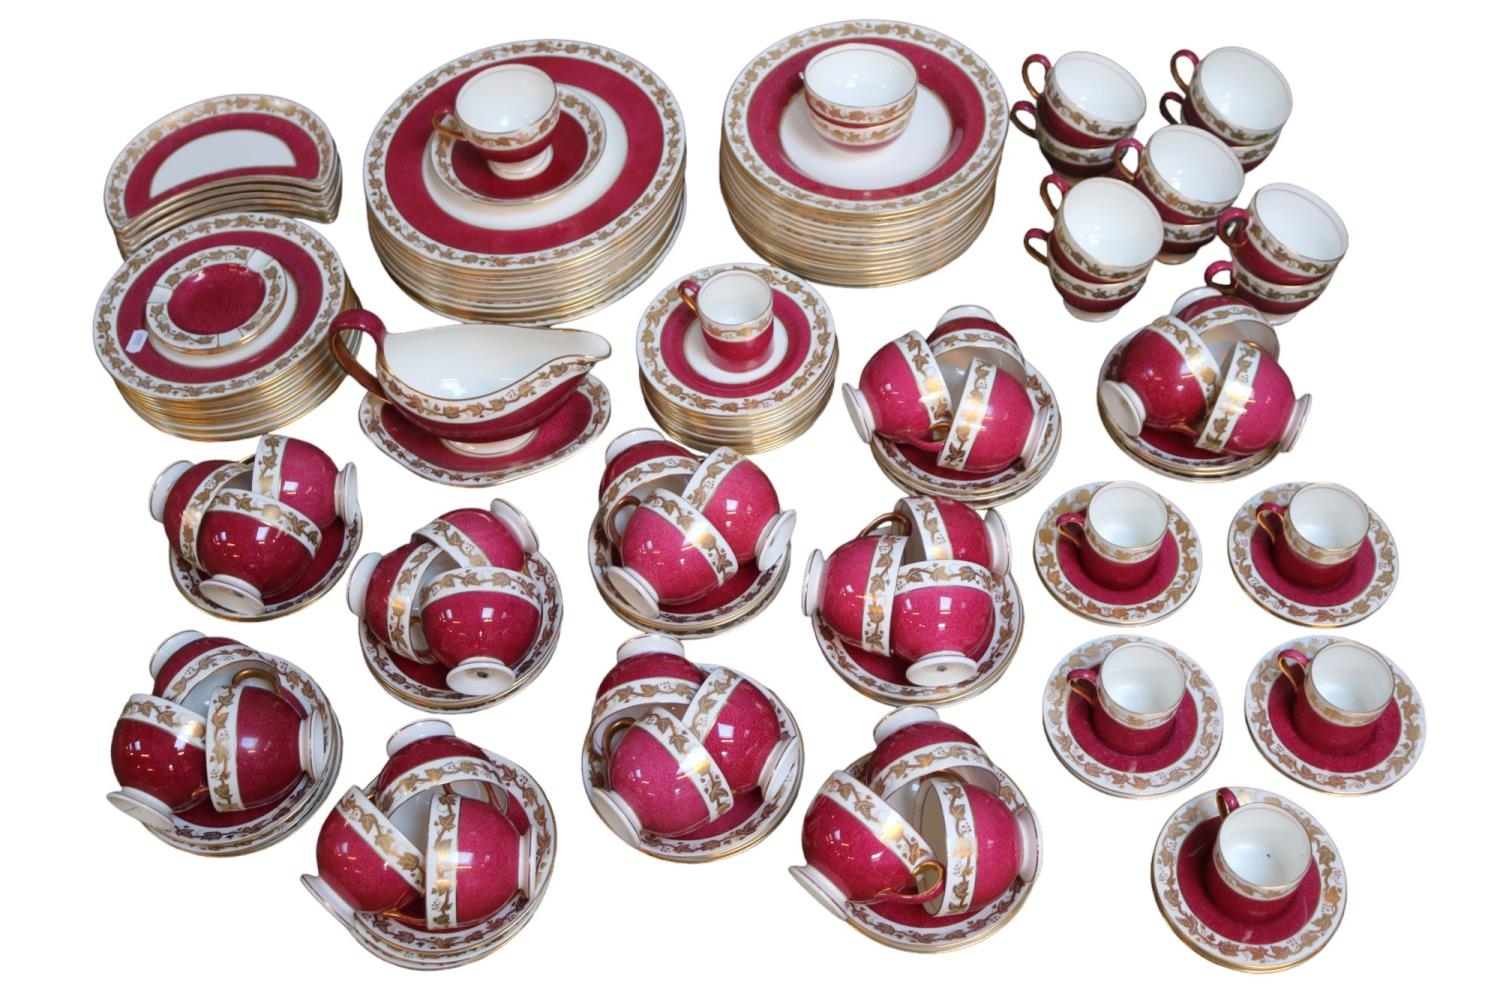 Extensive Wedgwood Bone China Whitehall pattern Dinner & Tea service Approx. 120 + Pieces